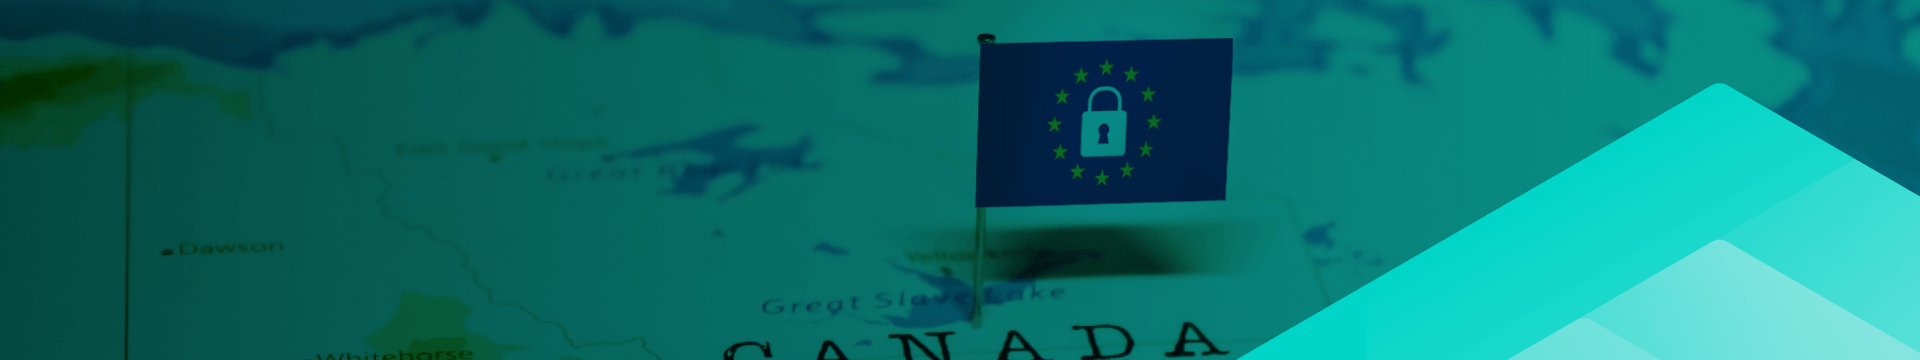 GDPR will soon be everywhere as Canada preps it's own compliance laws mimicking Europe's GDPR.